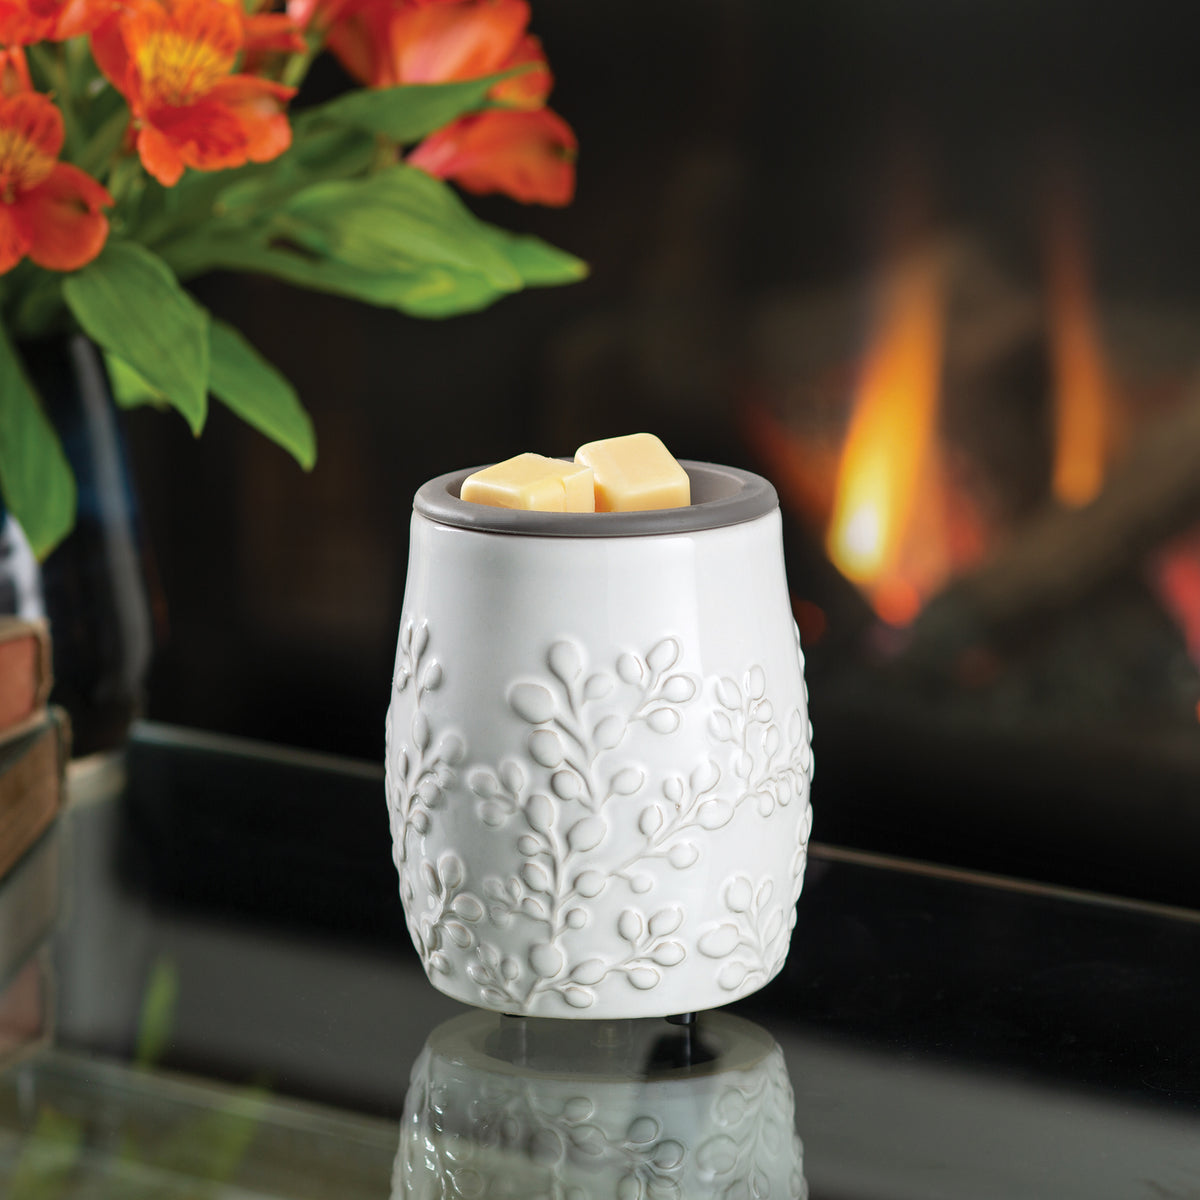 White Washed Bronze: 2-in-1 Fragrance Warmer